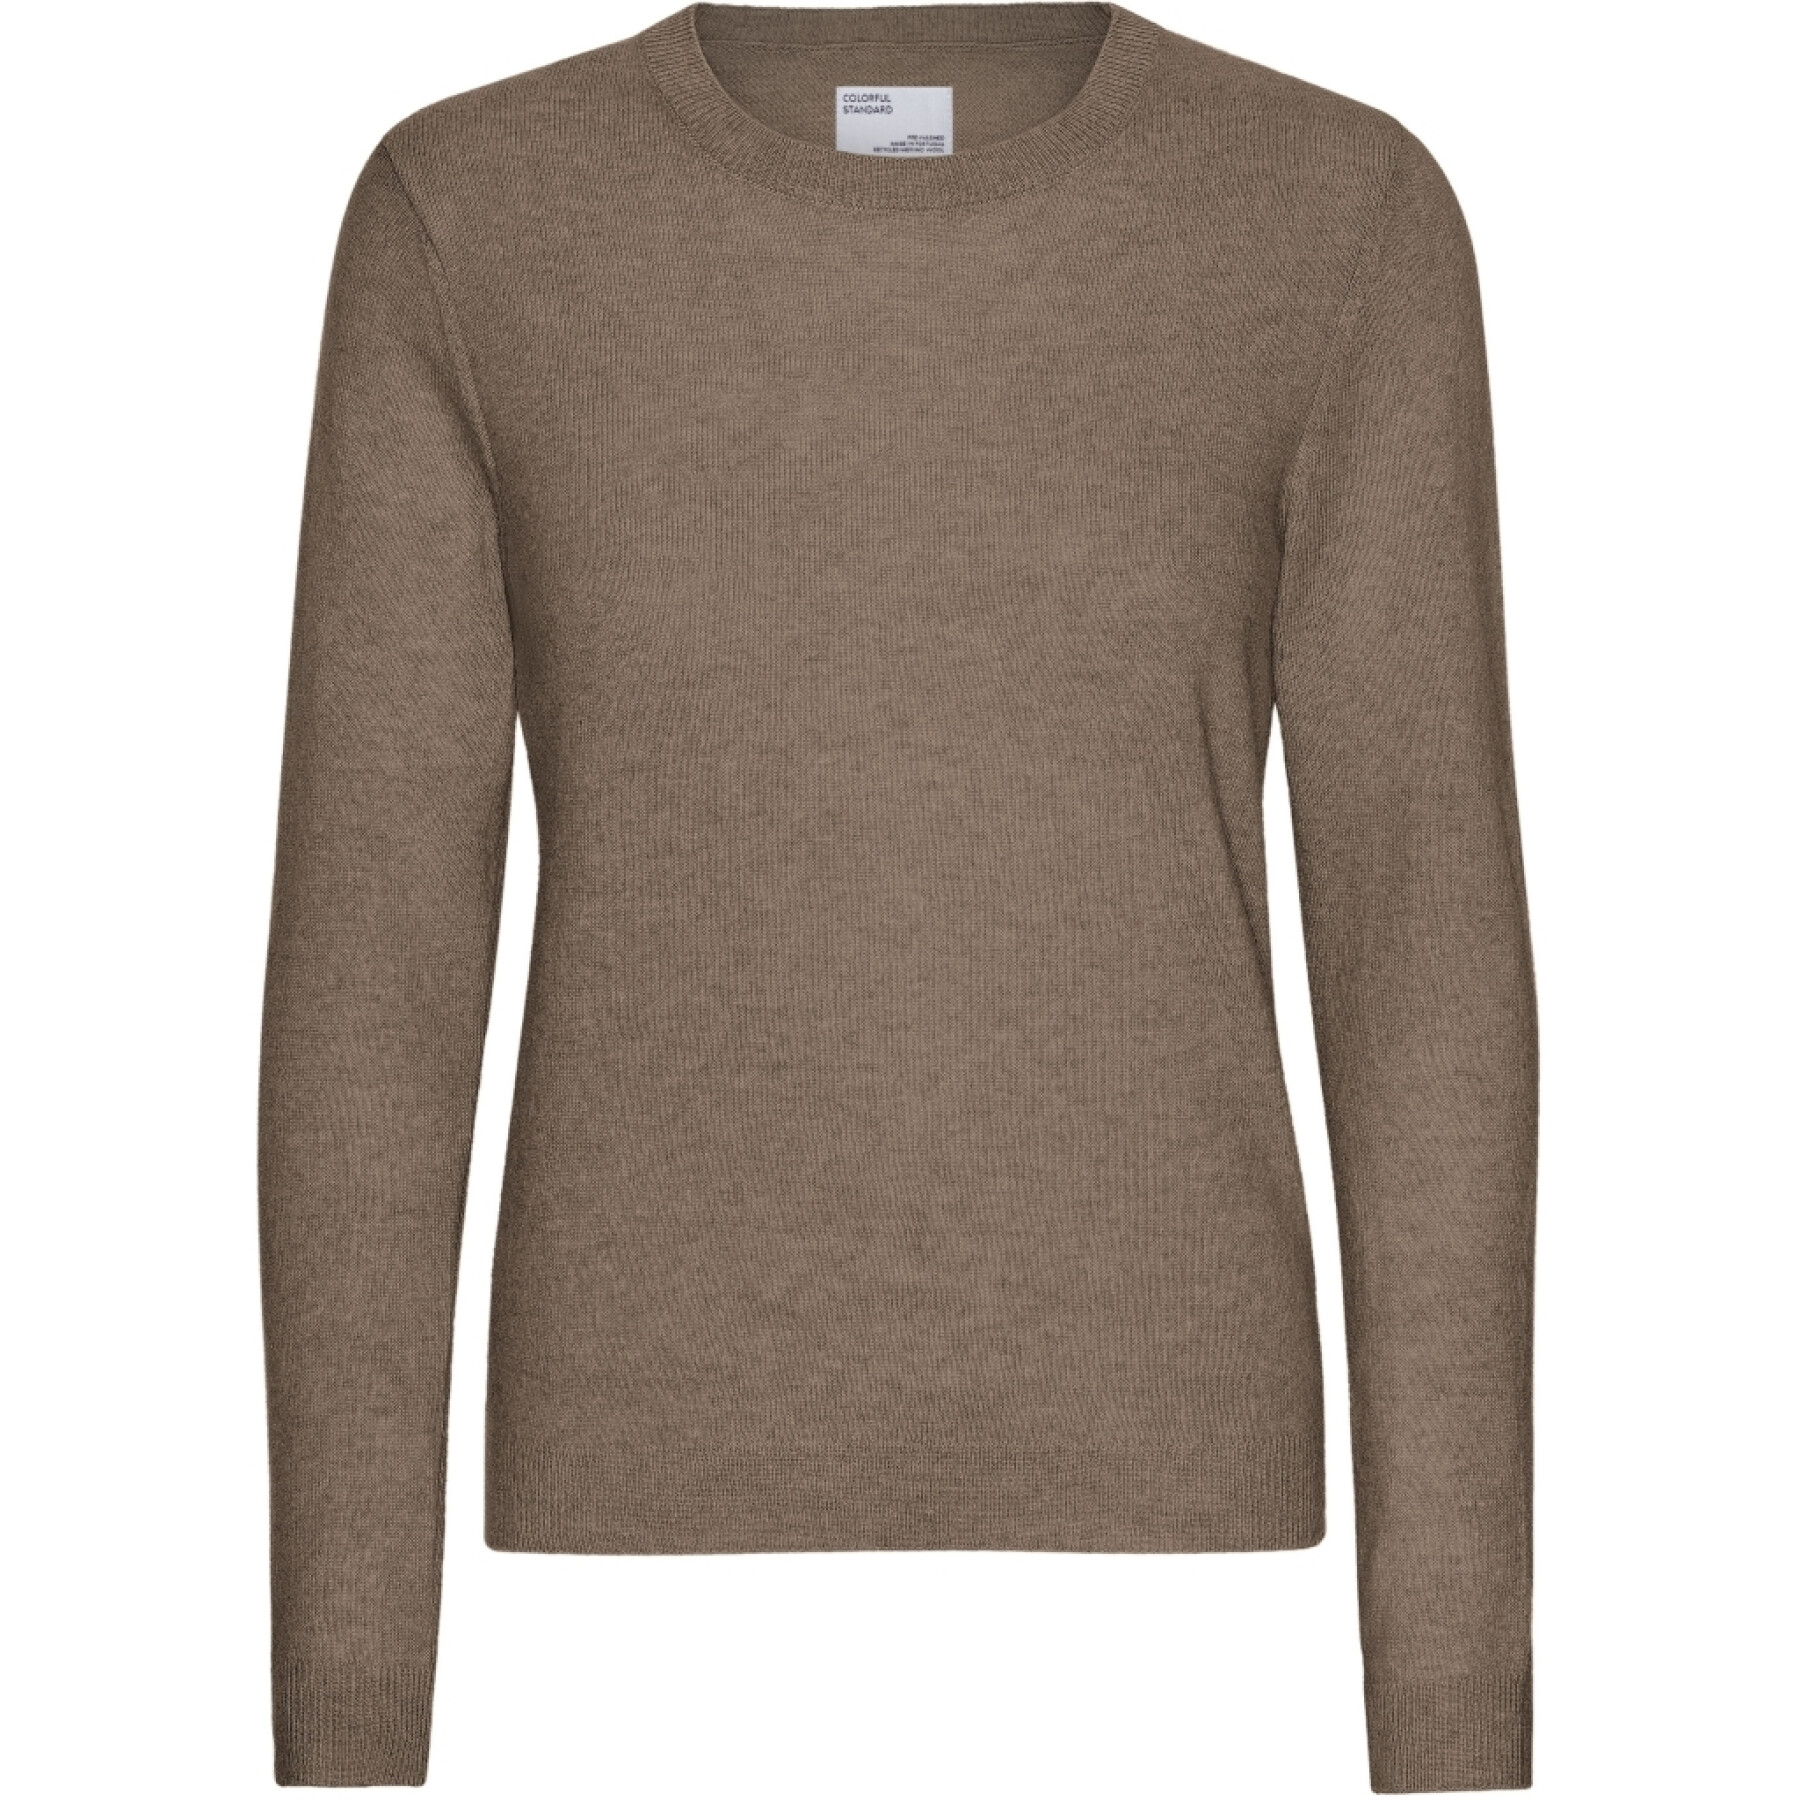 Jersey de mujer Colorful Standard Warm Taupe